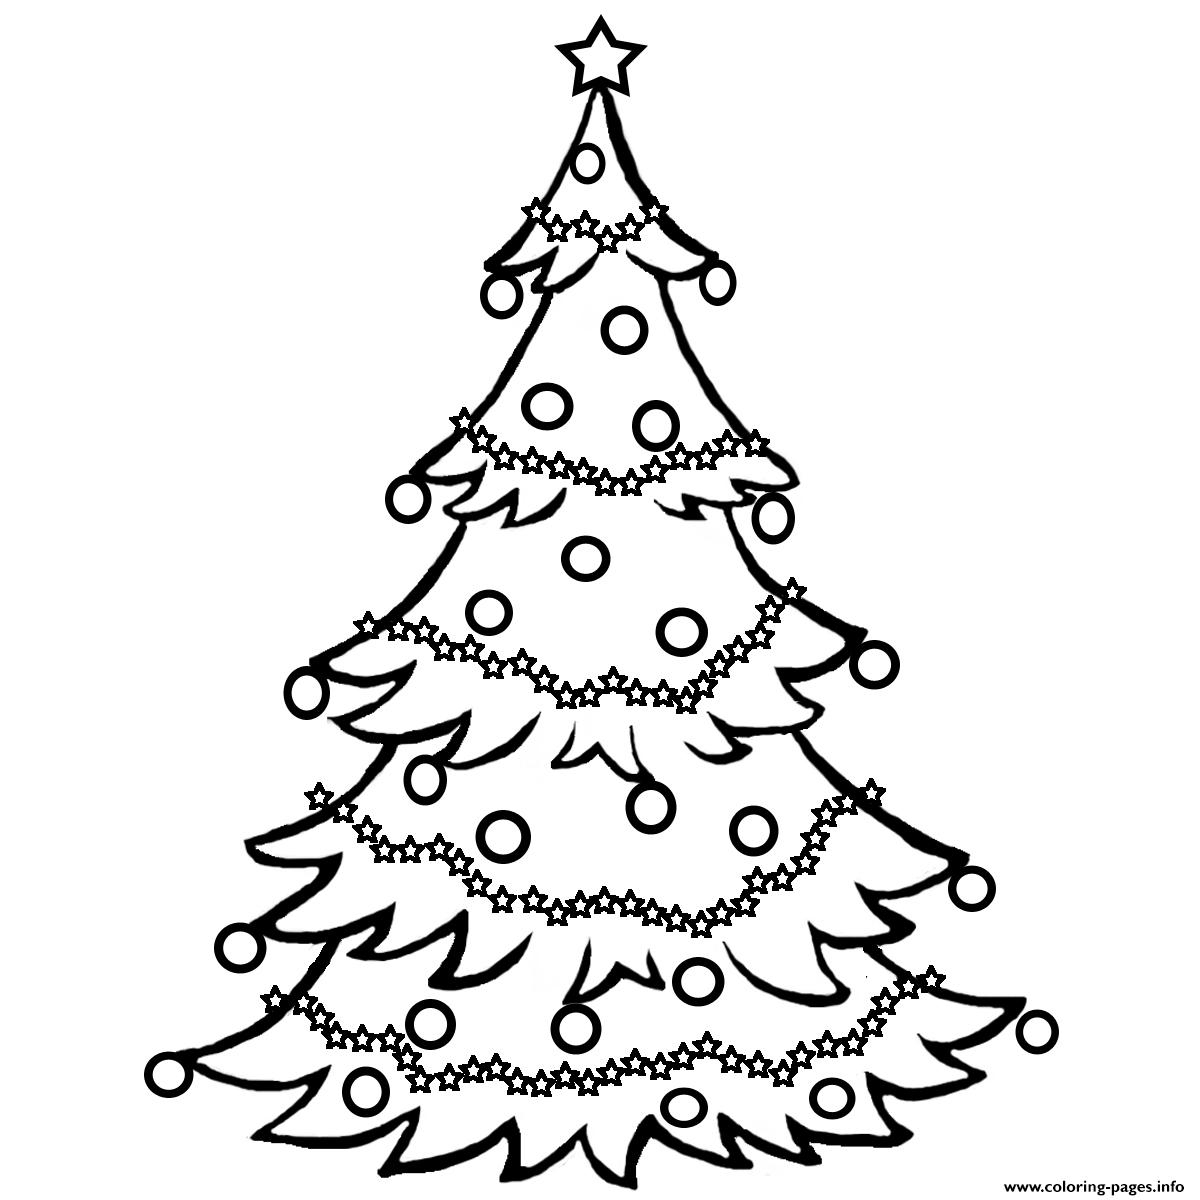 Christmas Tree Free Coloring Pages Printable - Free Printable Christmas Tree Images